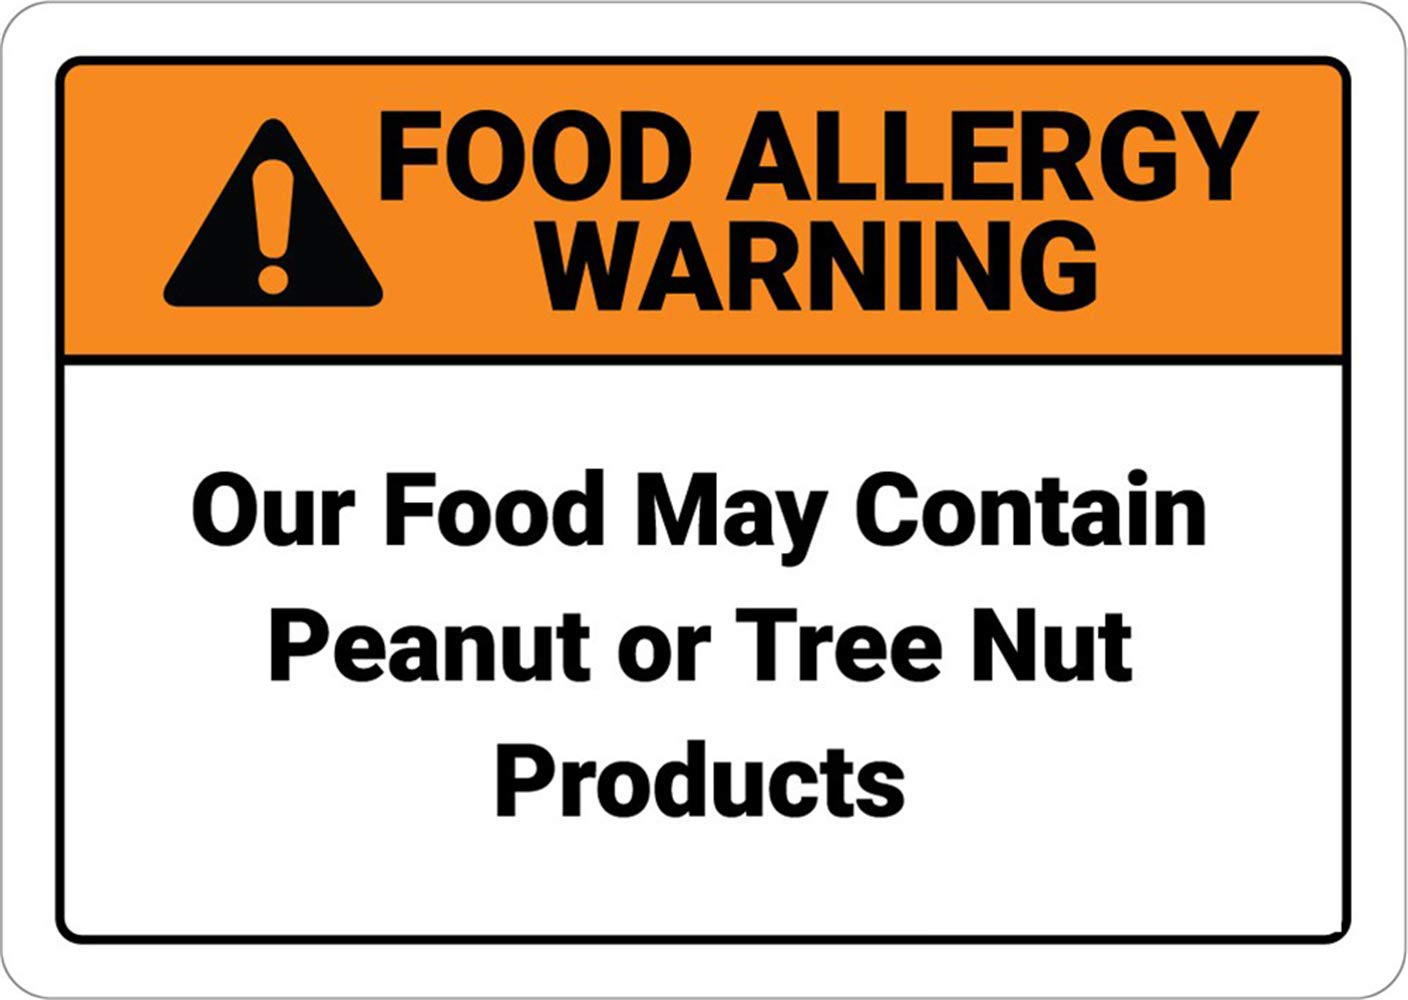 Food Allergy Warning - Our Food May Contain Peanut or Tree Nut Products